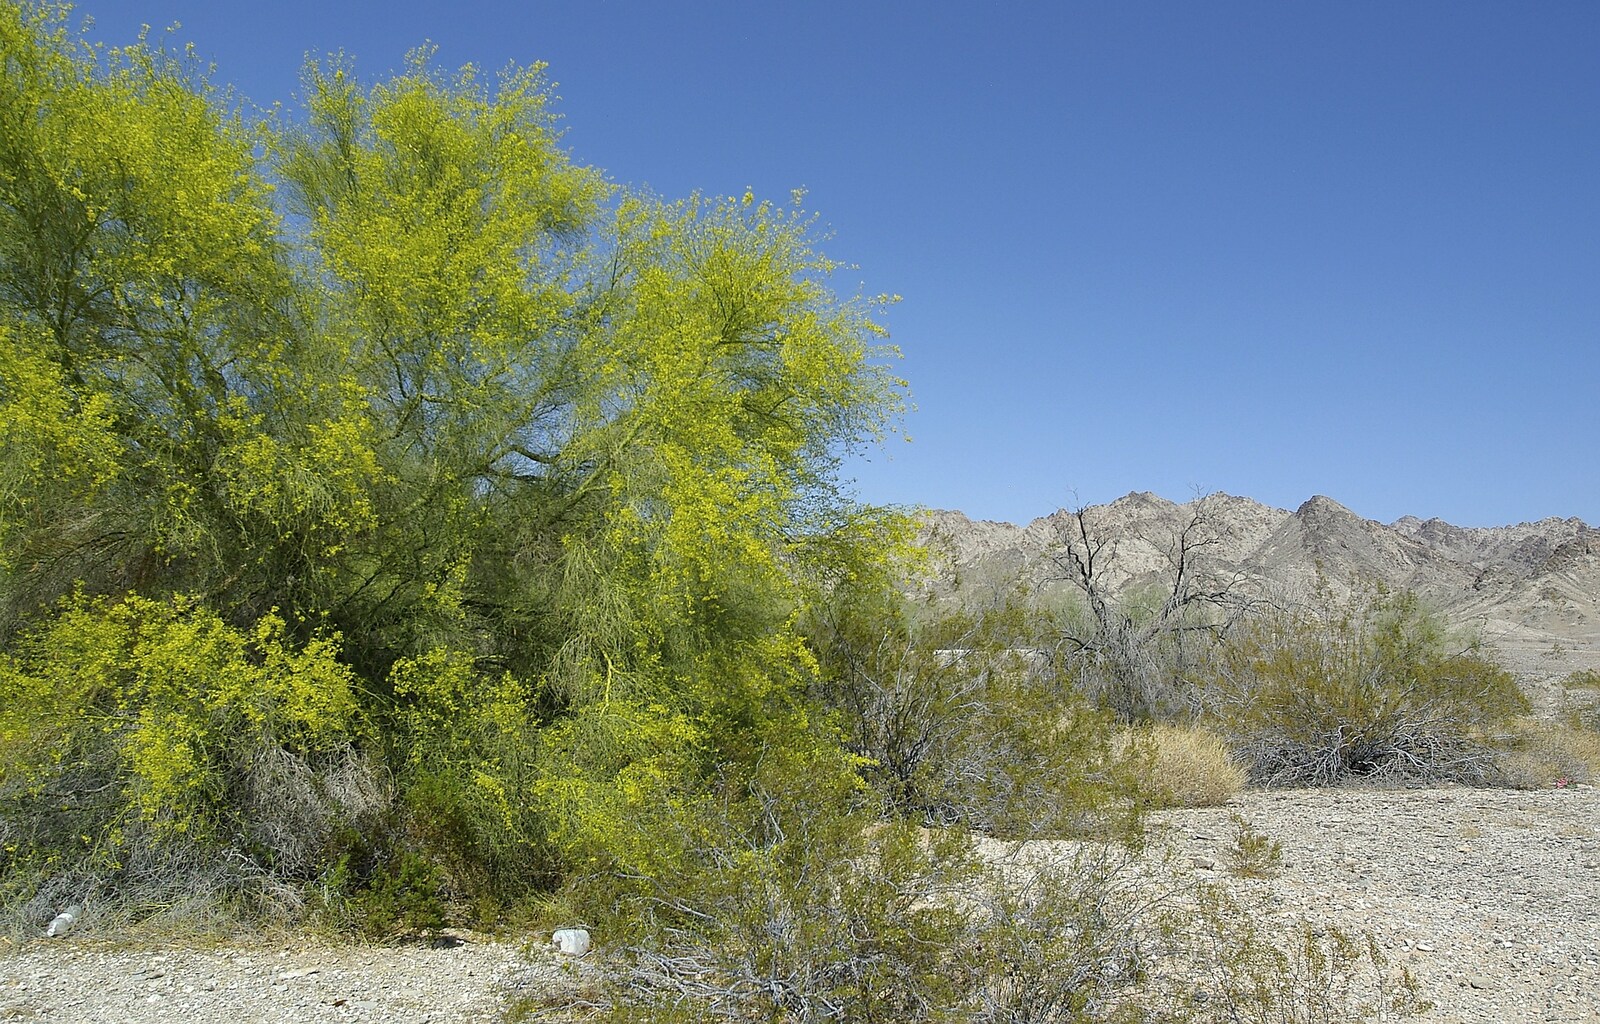 Bright green foliage from San Diego Seven: The Desert and the Dunes, Arizona and California, US - 22nd April